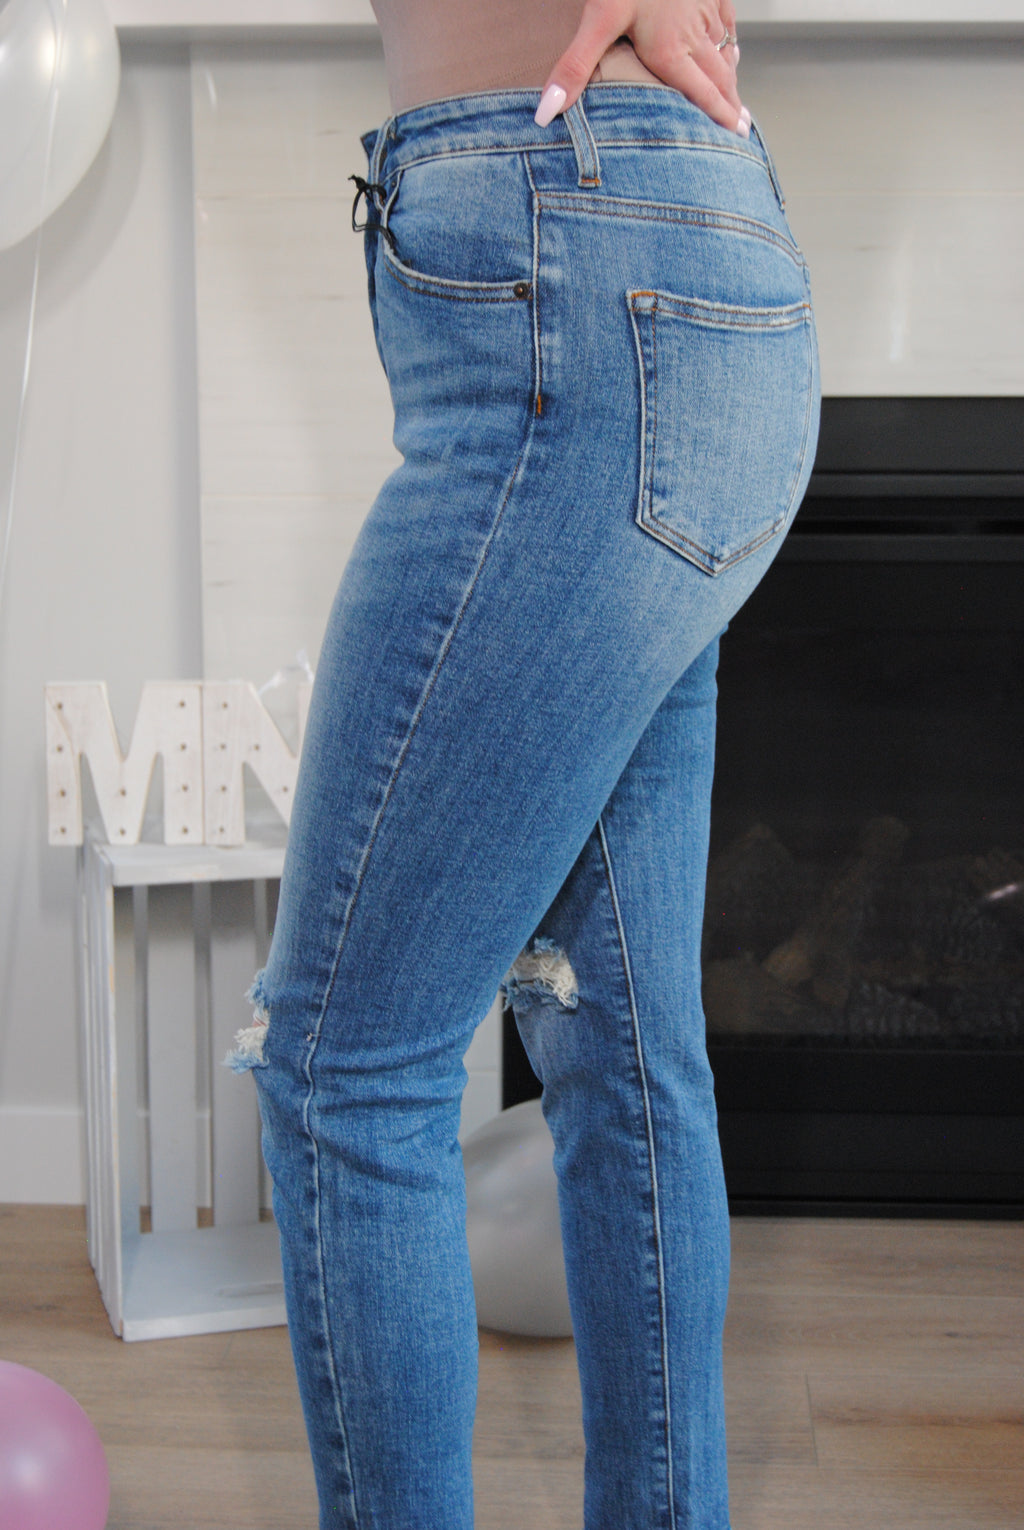 Reckless Skinny Jeans - MNR Beauty Boutique